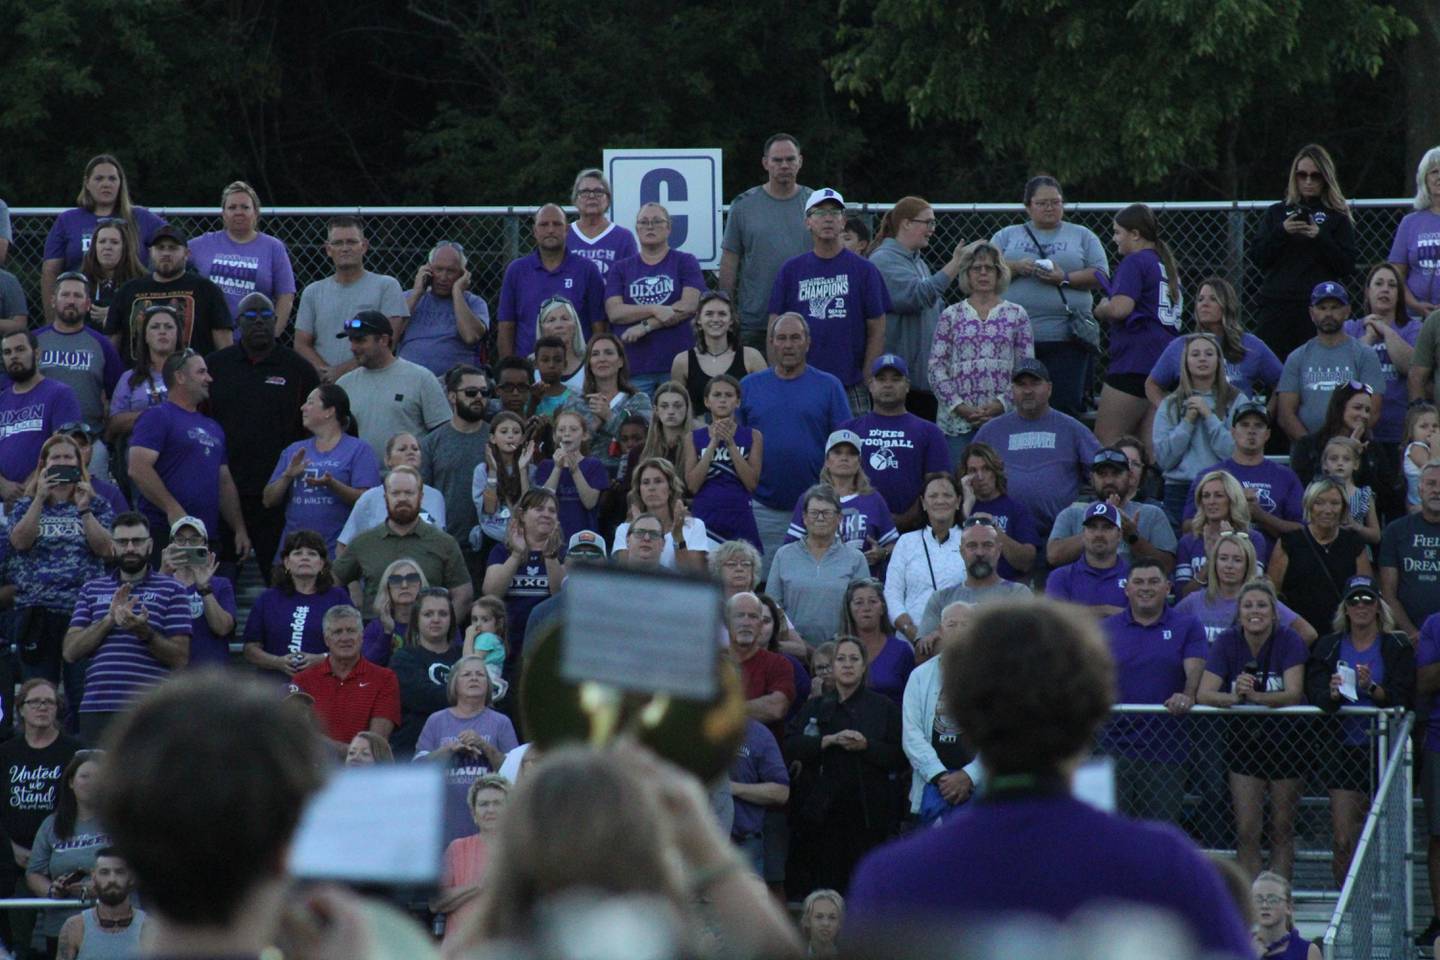 The home bleacher section at A.C. Bowers Field is filled for the Dixon High School home opener on Sept. 9, 2022. Ticket sales for football accounted for $14,882 of the district's $26,051 ticket revenue for fall 2022 sports.